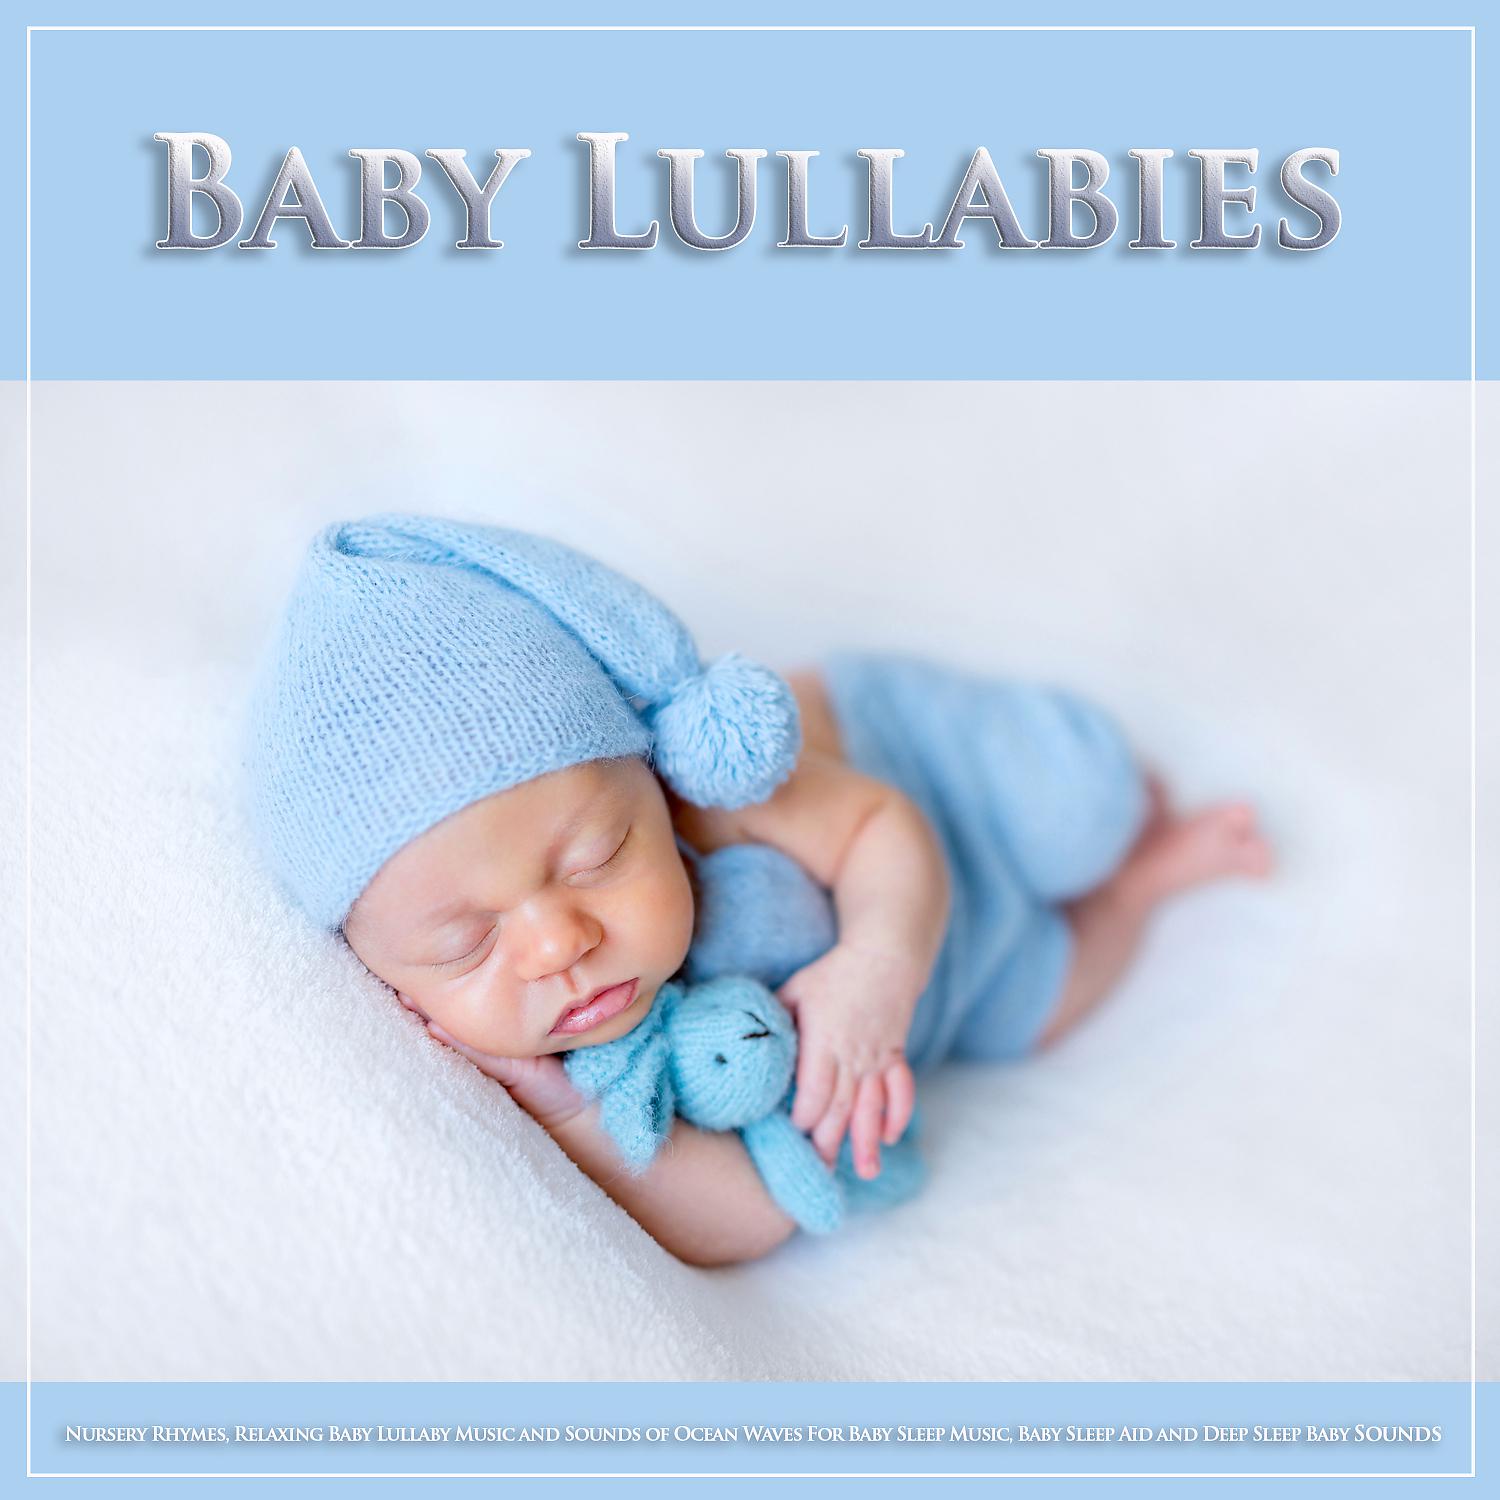 Постер альбома Baby Lullabies: Nursery Rhymes, Relaxing Baby Lullaby Music and Sounds of Ocean Waves For Baby Sleep Music, Baby Sleep Aid and Deep Sleep Baby Sounds